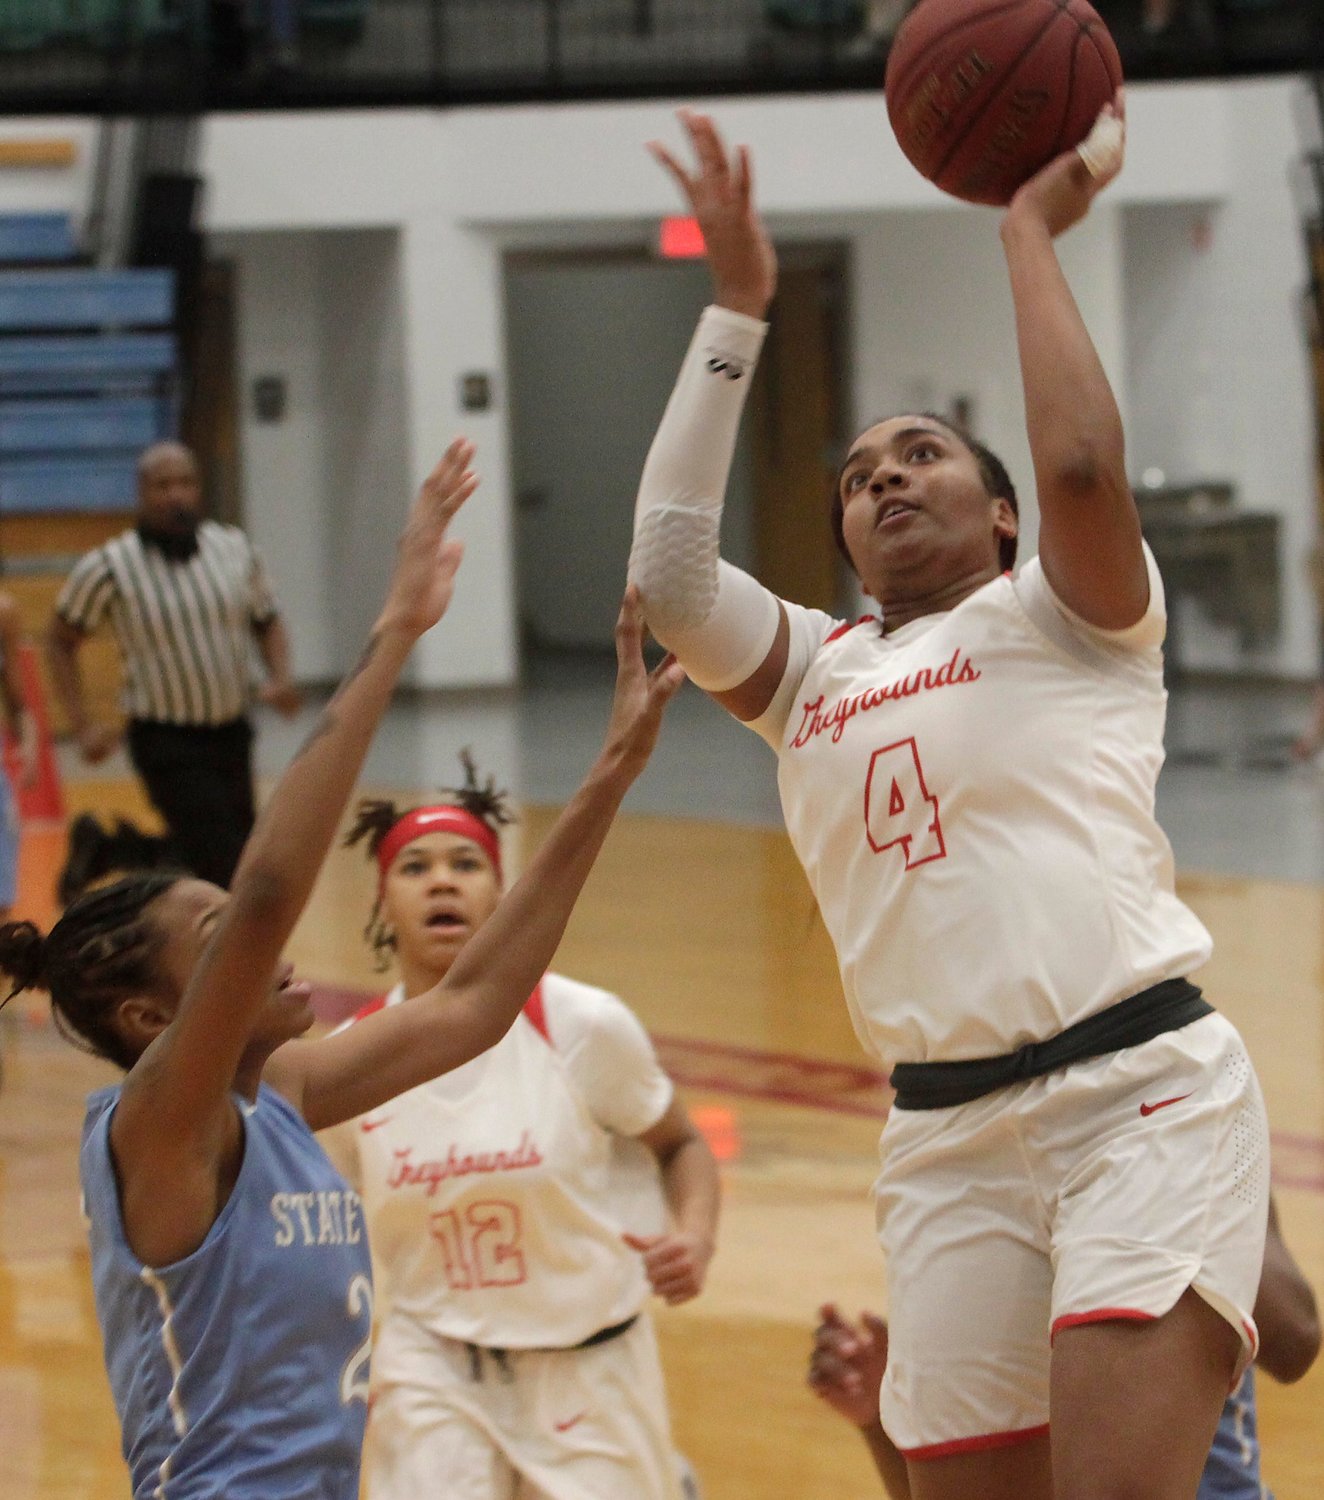 Moberly Area Community Collee sophomore transfer Jada Moorehead (#4) came off the bench Saturday to provide 10 points towards the Lady Greyhounds 111-51 home victory against State Fair CC of Sedalia in Region 16 play.